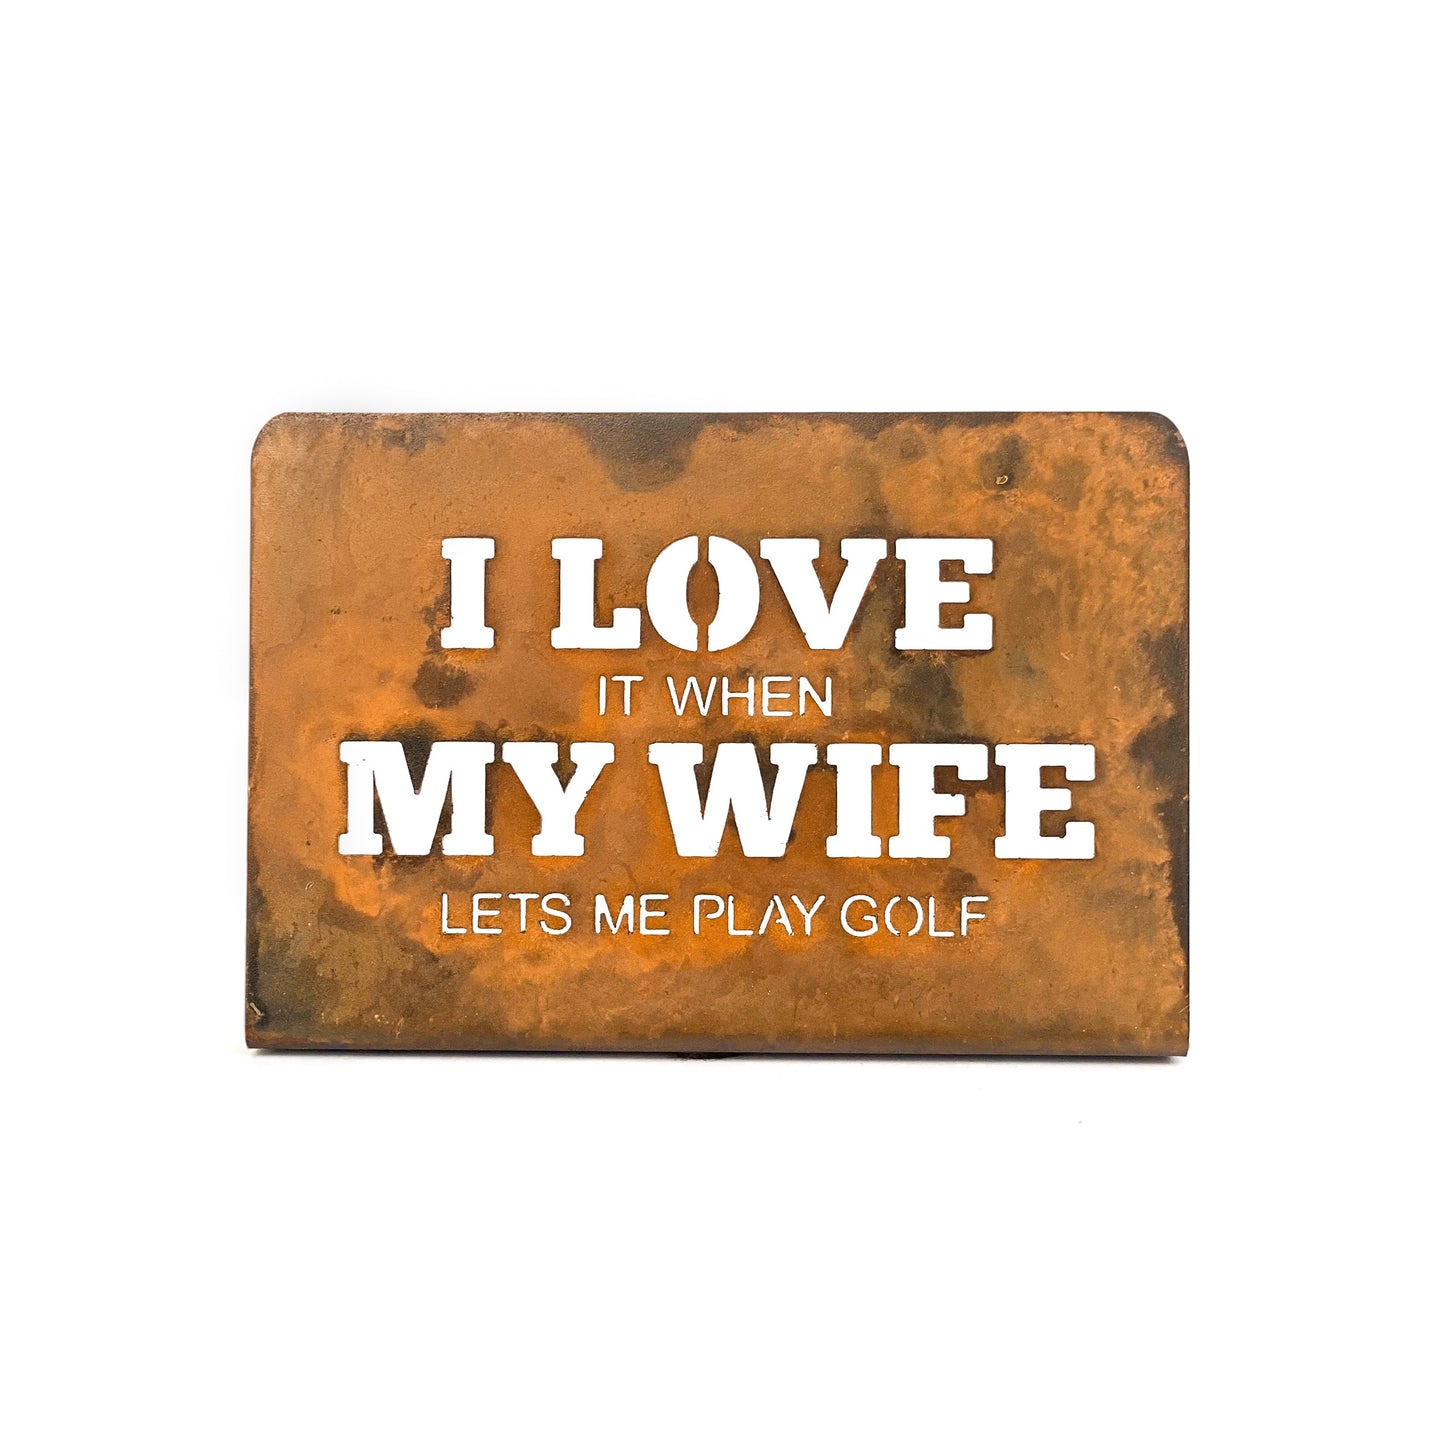 I Love My Wife Sign